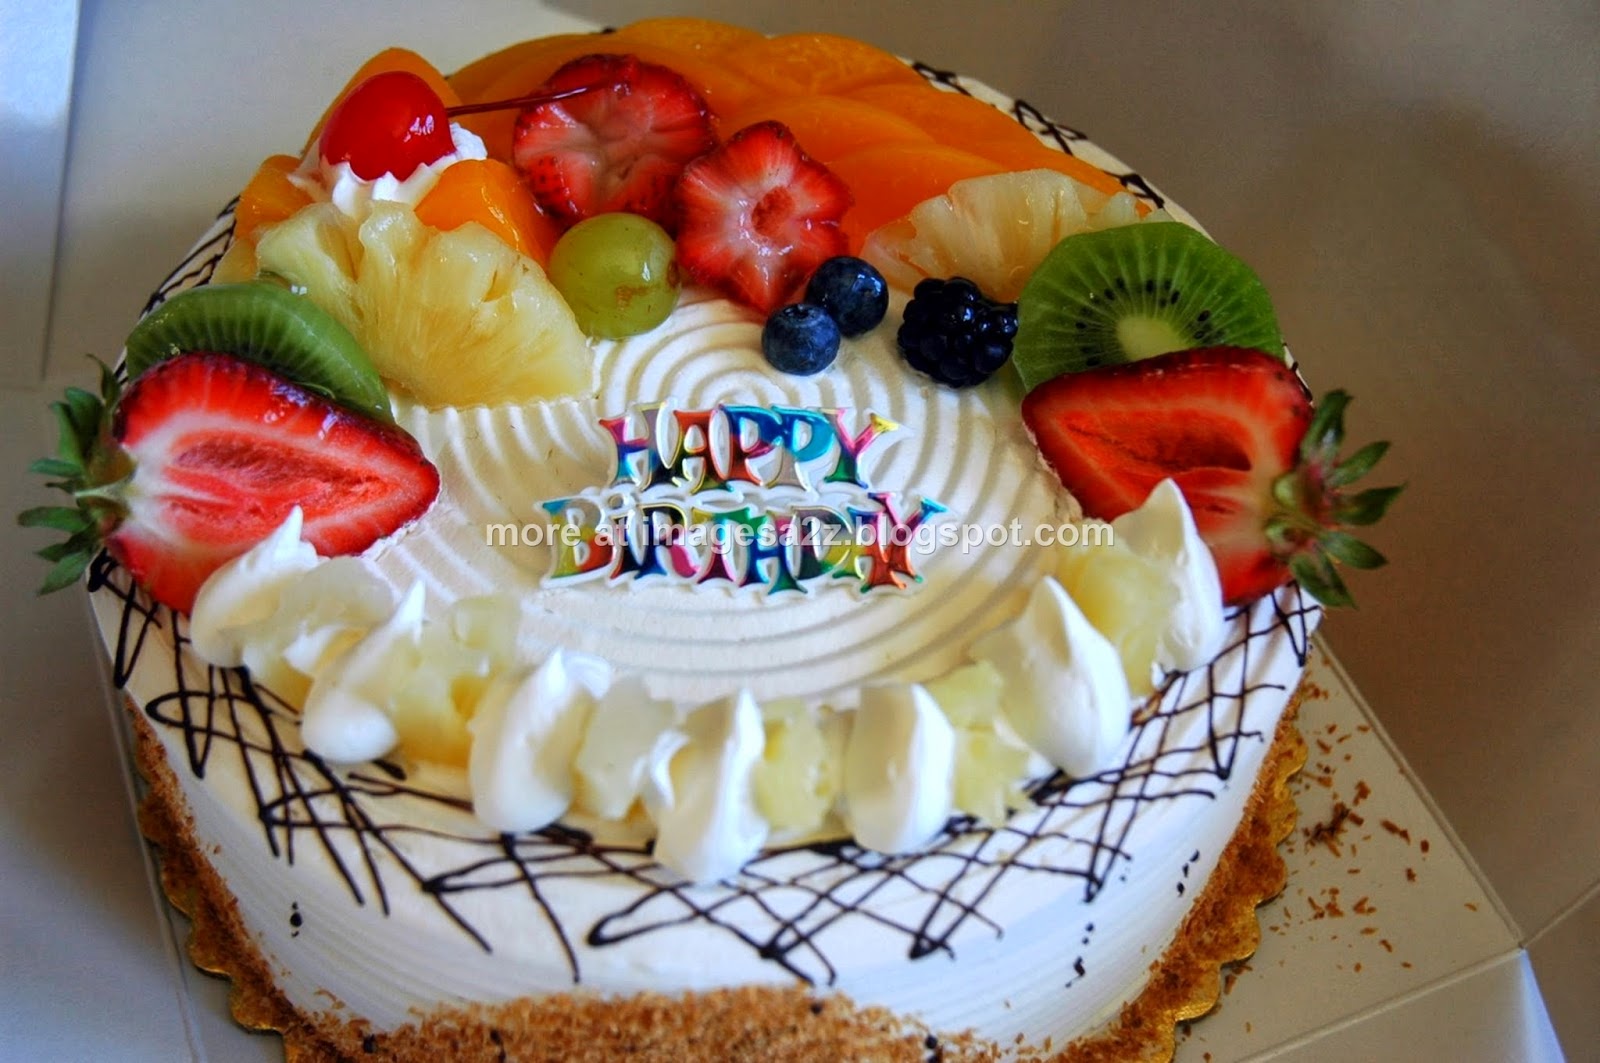 for sister with cake images  happybirthdaywishesquotescakes 